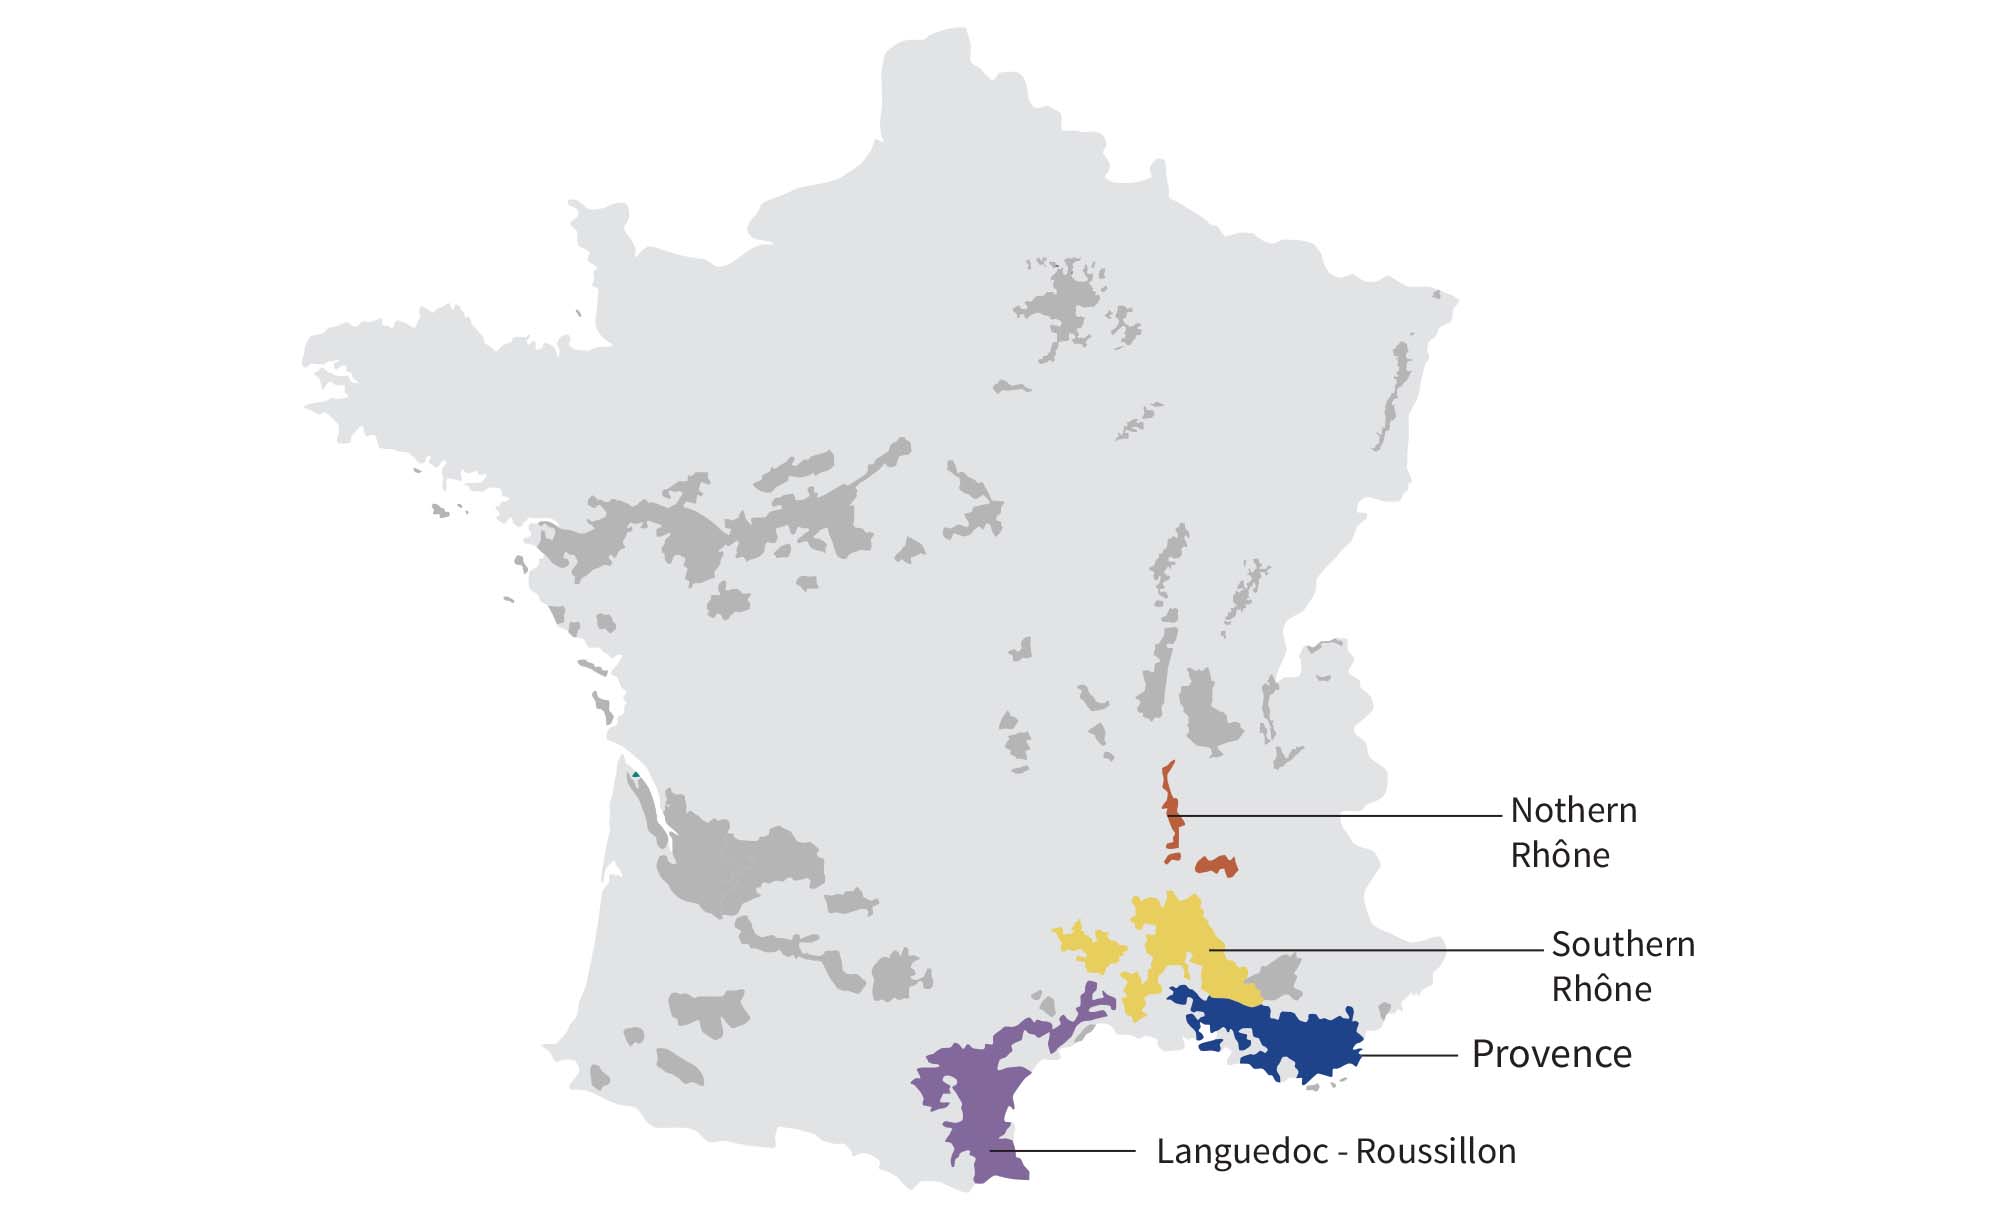 map of grenache winegrowing regions in France: Rhone Valley, Provence, Languedoc-Roussillon